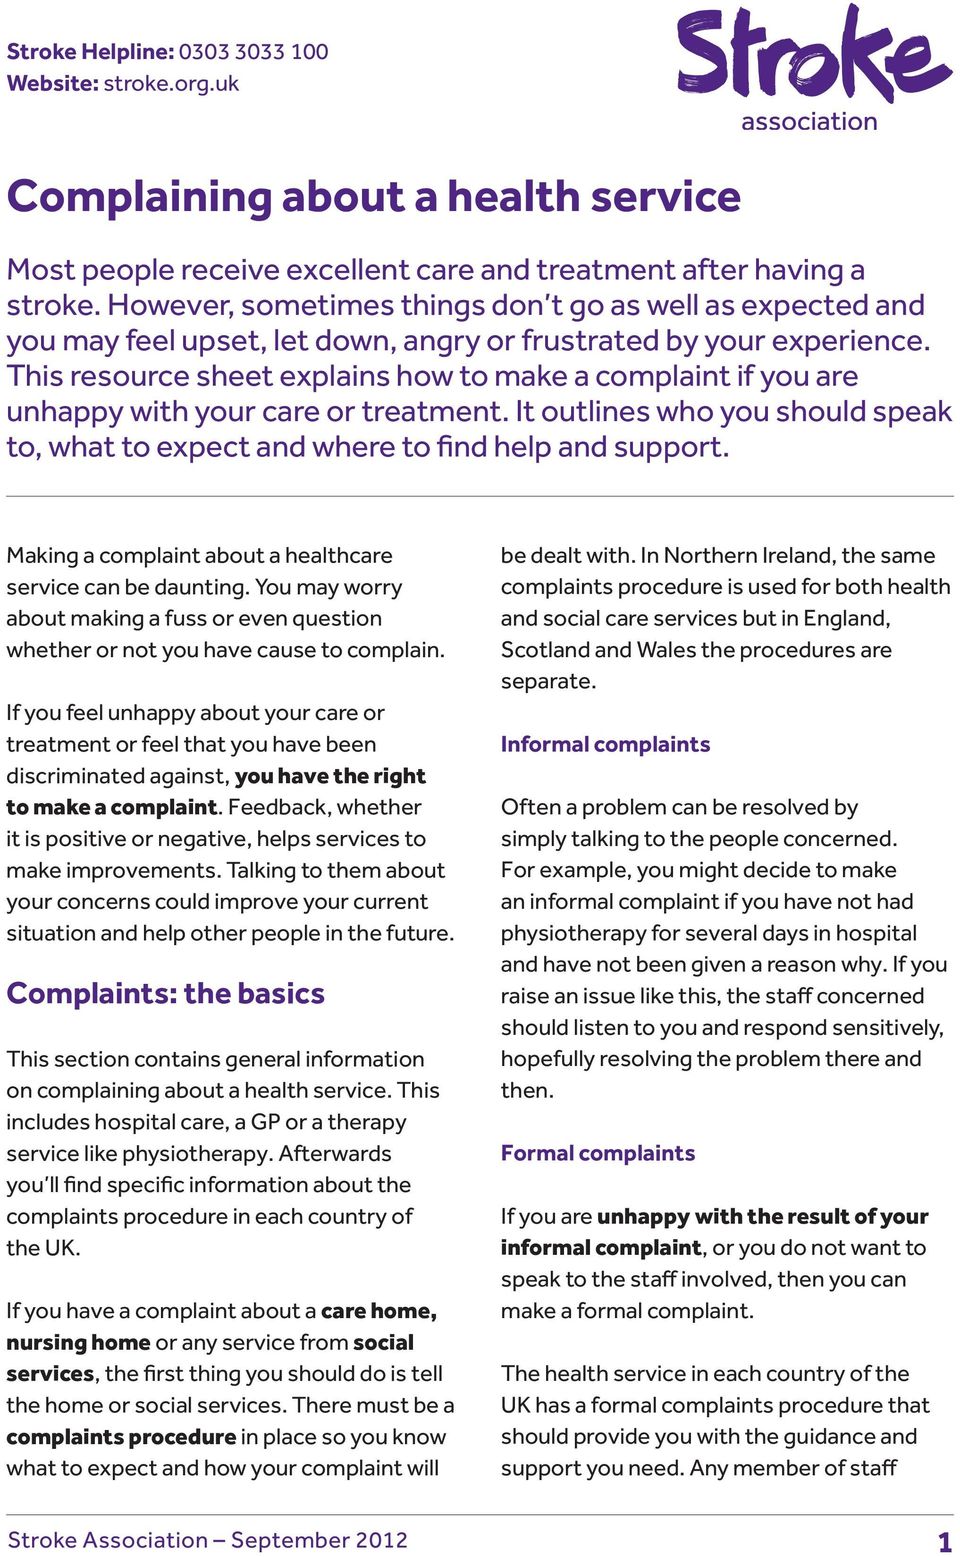 This resource sheet explains how to make a complaint if you are unhappy with your care or treatment. It outlines who you should speak to, what to expect and where to find help and support.